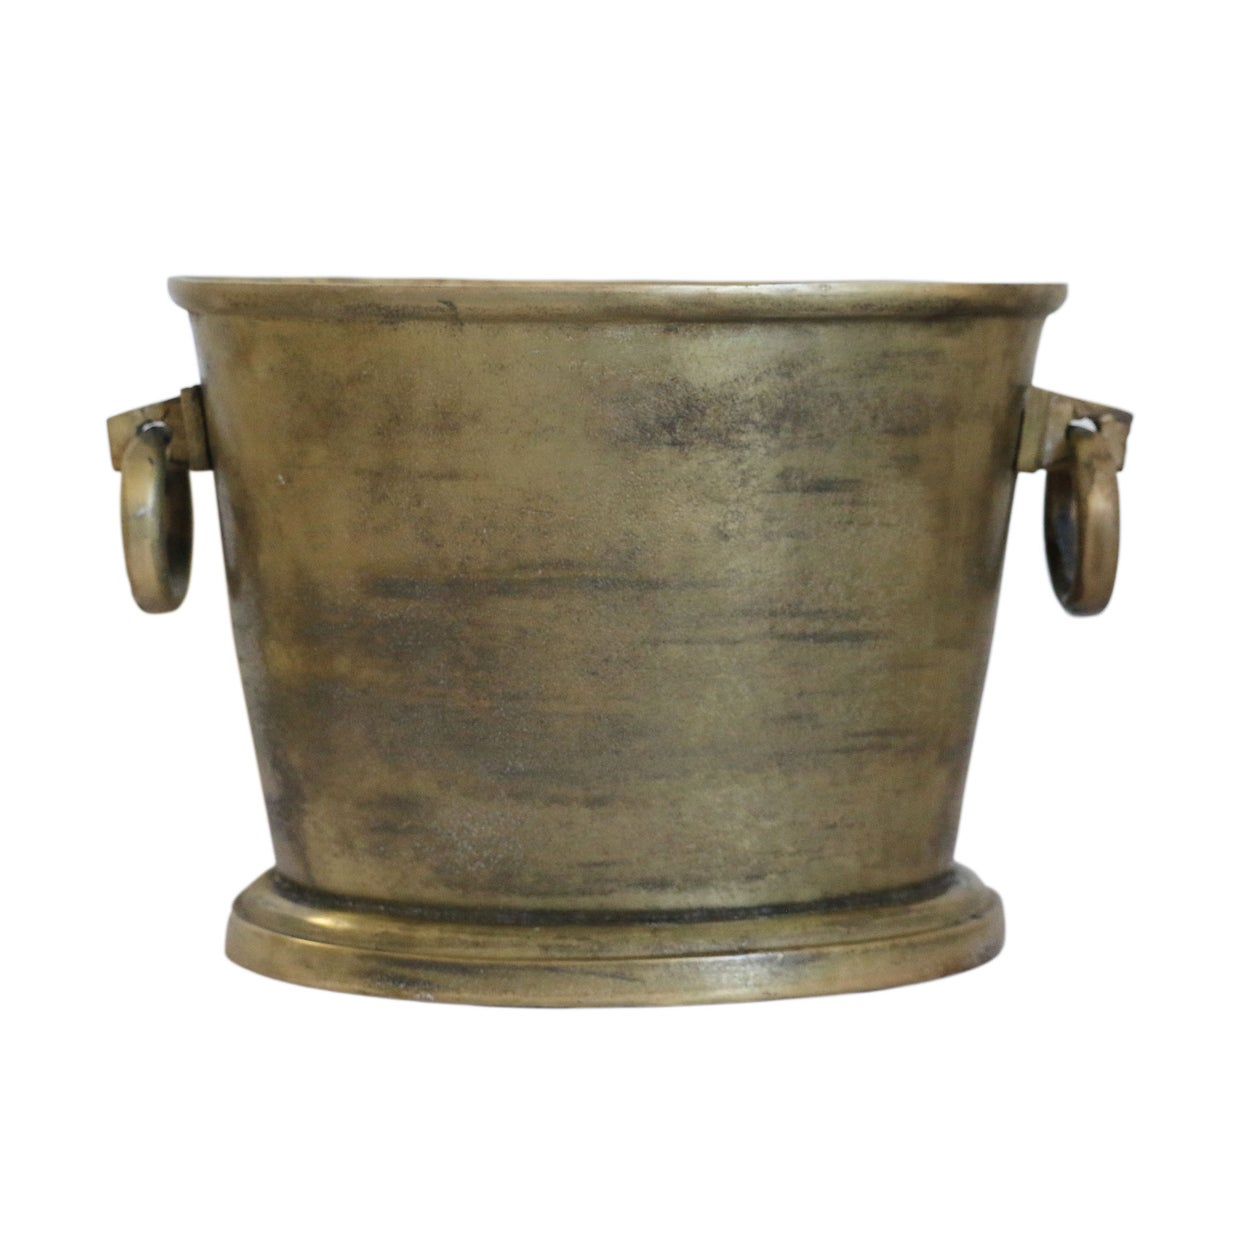 CAIRO OVAL CHAMPAGNE BUCKET ANTIQUE BRASS FINISH